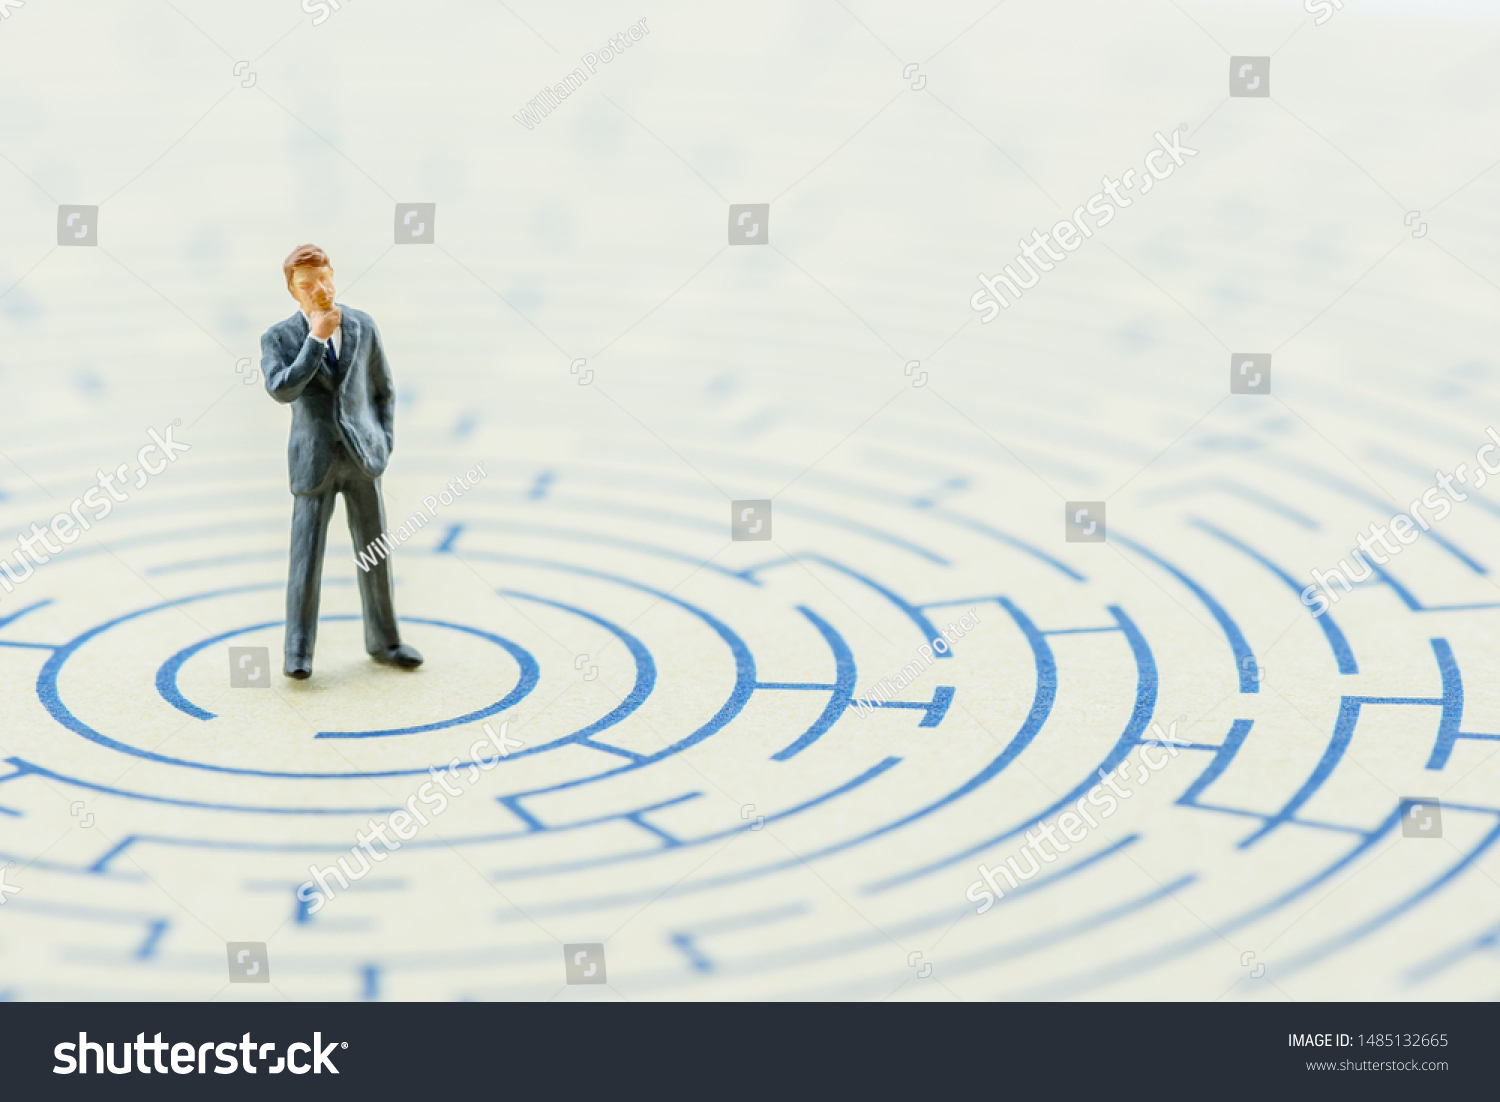 Business long-term decision, problem solving concept : Businessman thinks, find or searches for a way or direction to get out from hard situation, depicts complex strategy to escape from bad scenario #1485132665